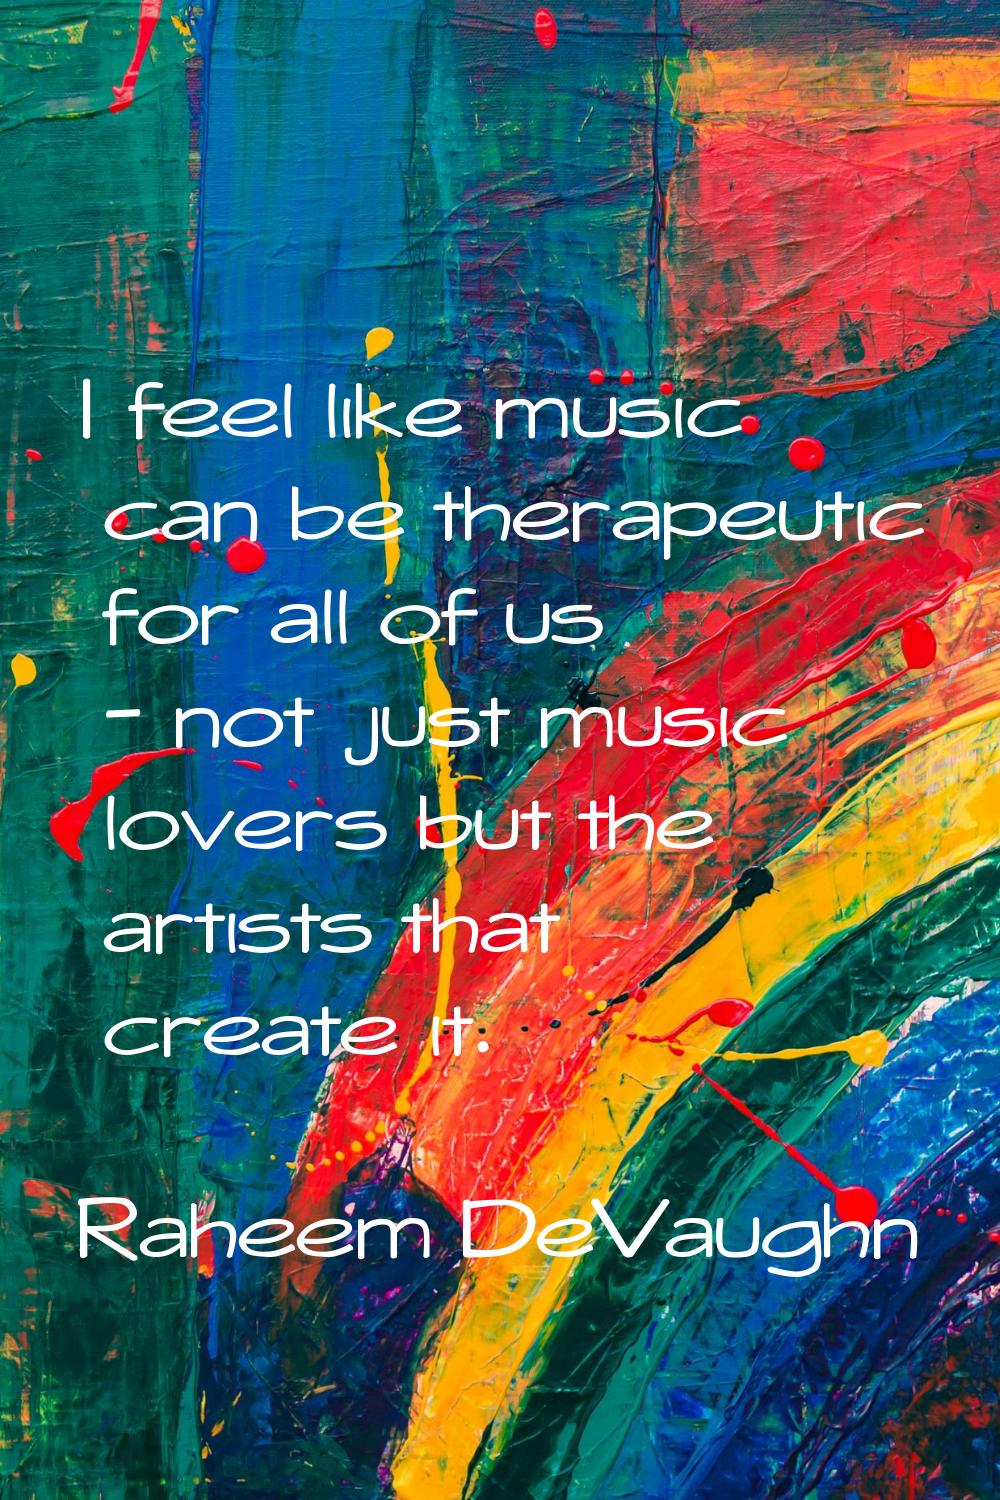 I feel like music can be therapeutic for all of us - not just music lovers but the artists that cre